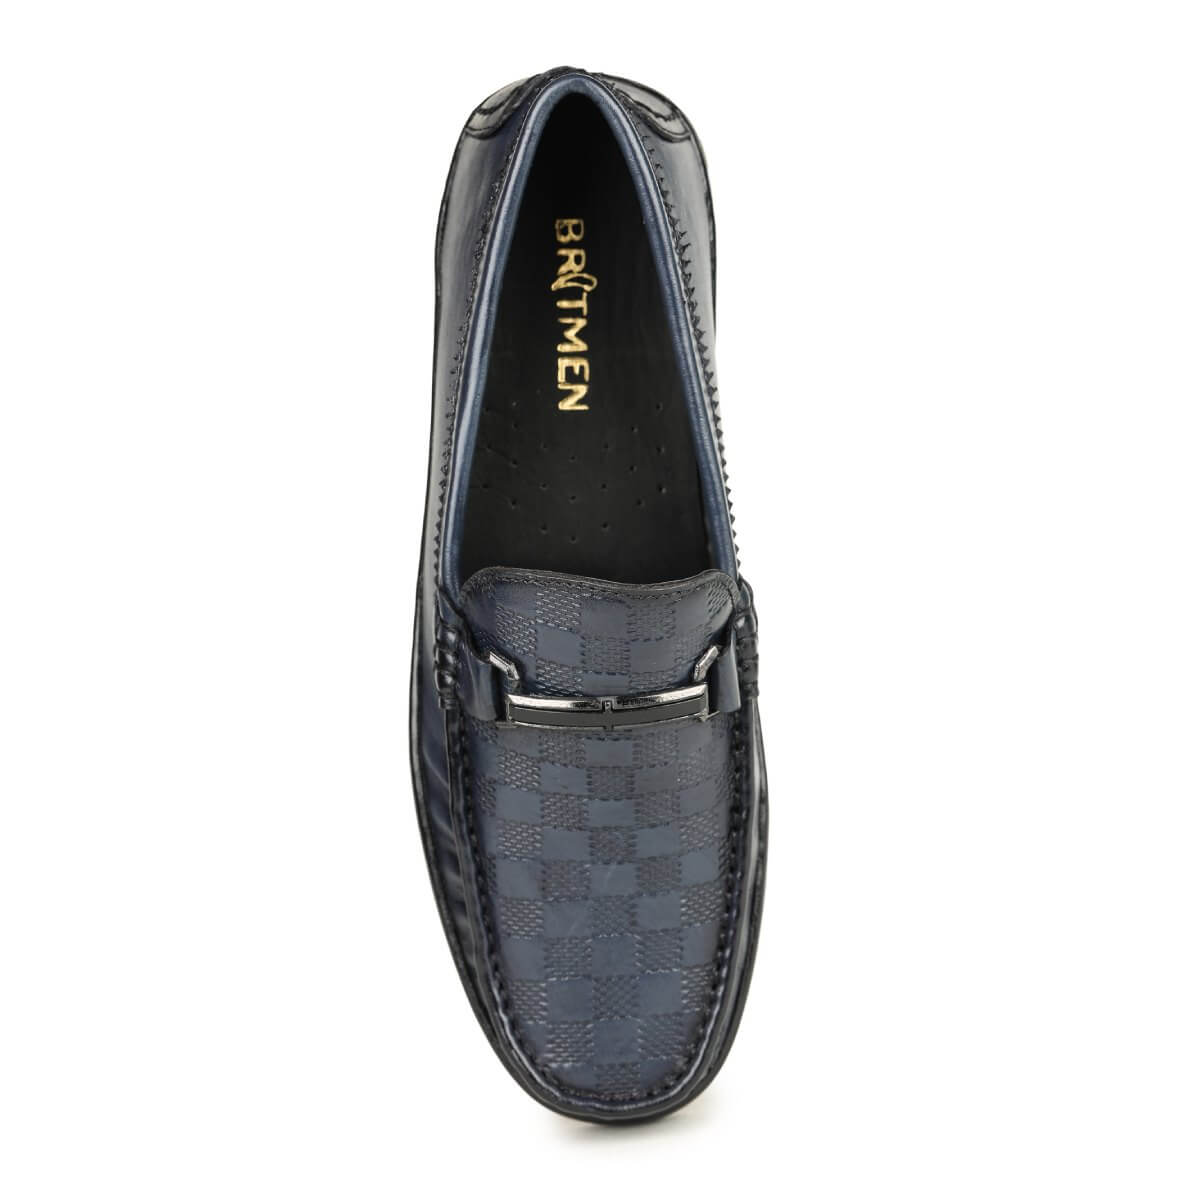 checkbox pattern loafers for men_blue